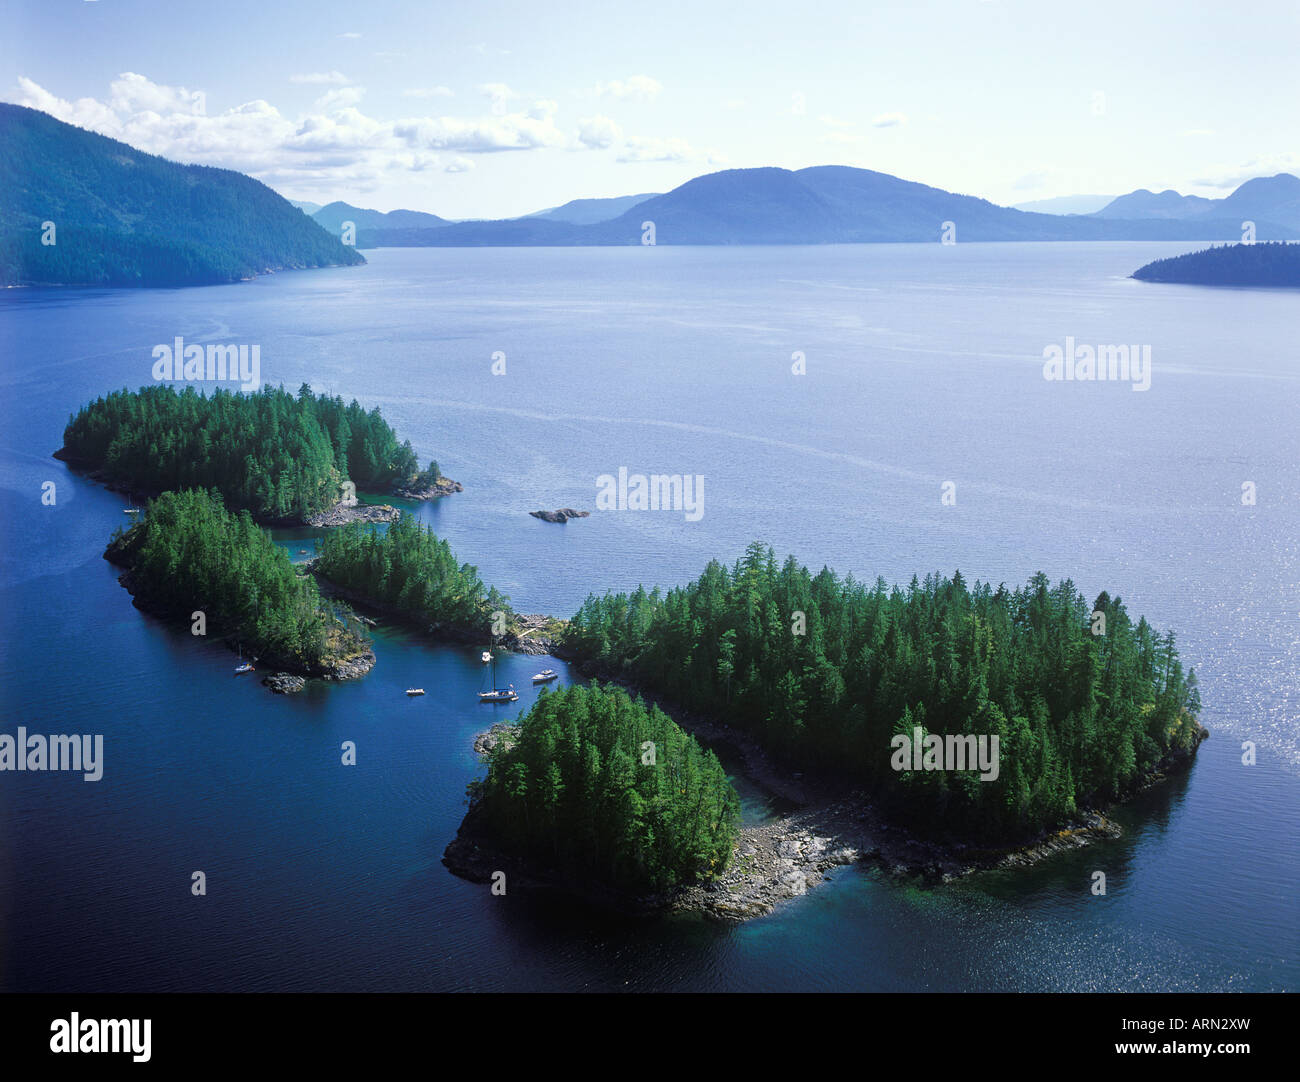 Aerial view of Jervis Inlet, Hotham Sound, Harmony Island, British Columbia, Canada. Stock Photo